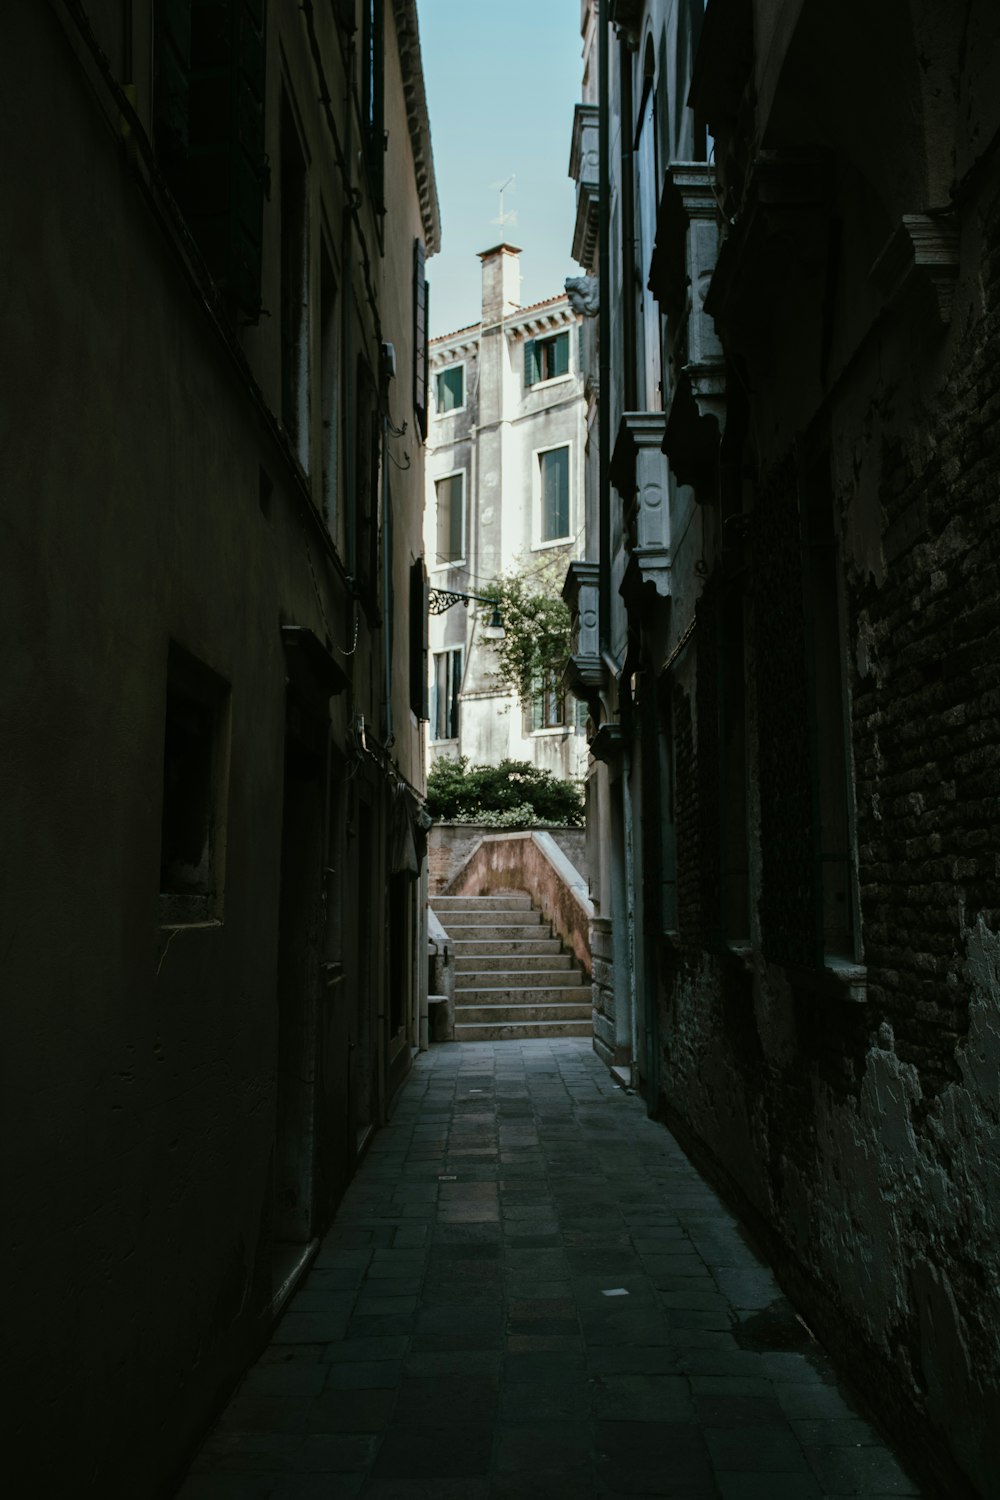 a narrow alley way with steps leading up to a building